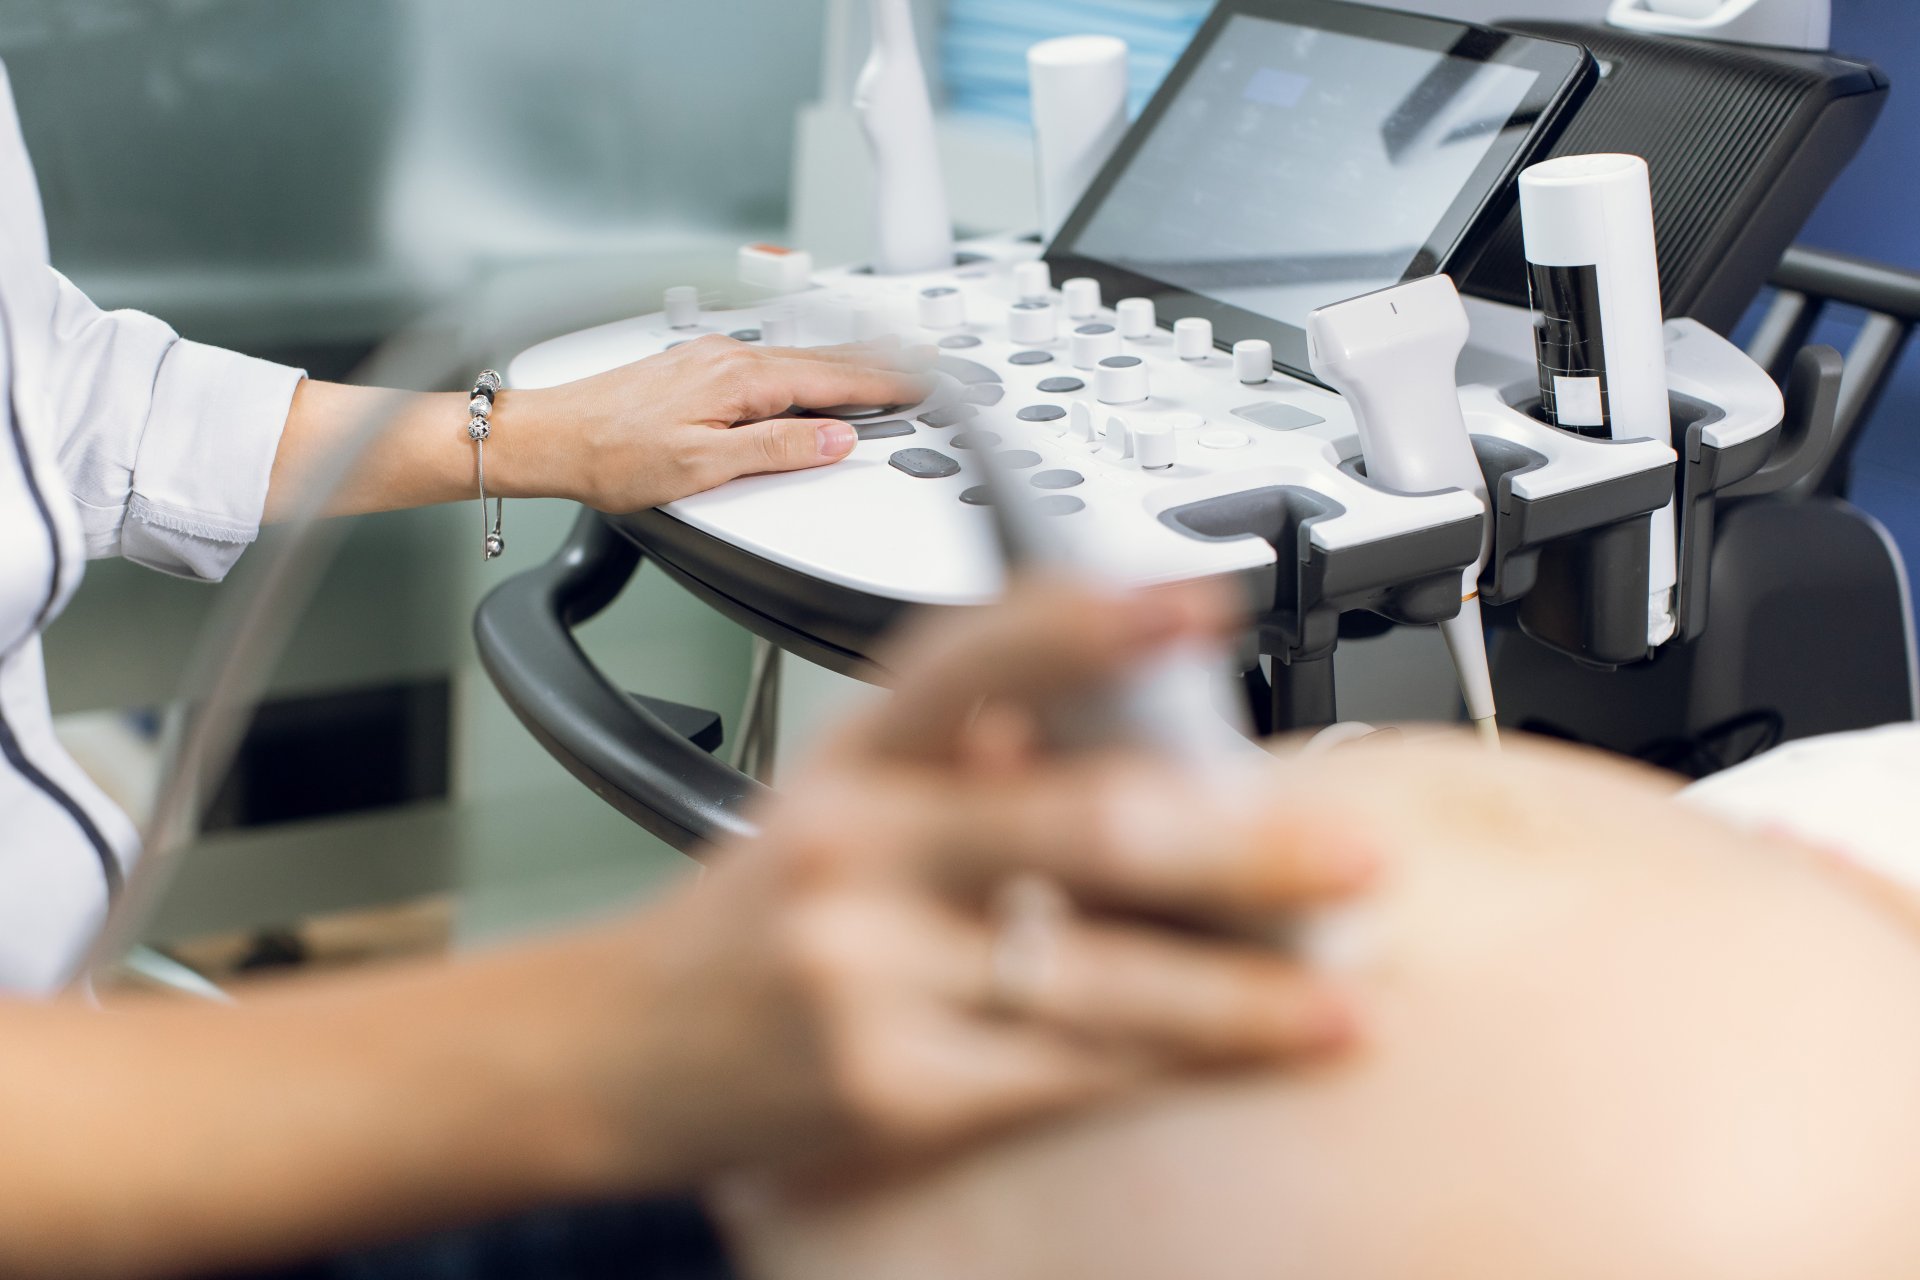 A sonographer observes the progress of a pregnancy using ultrasound.